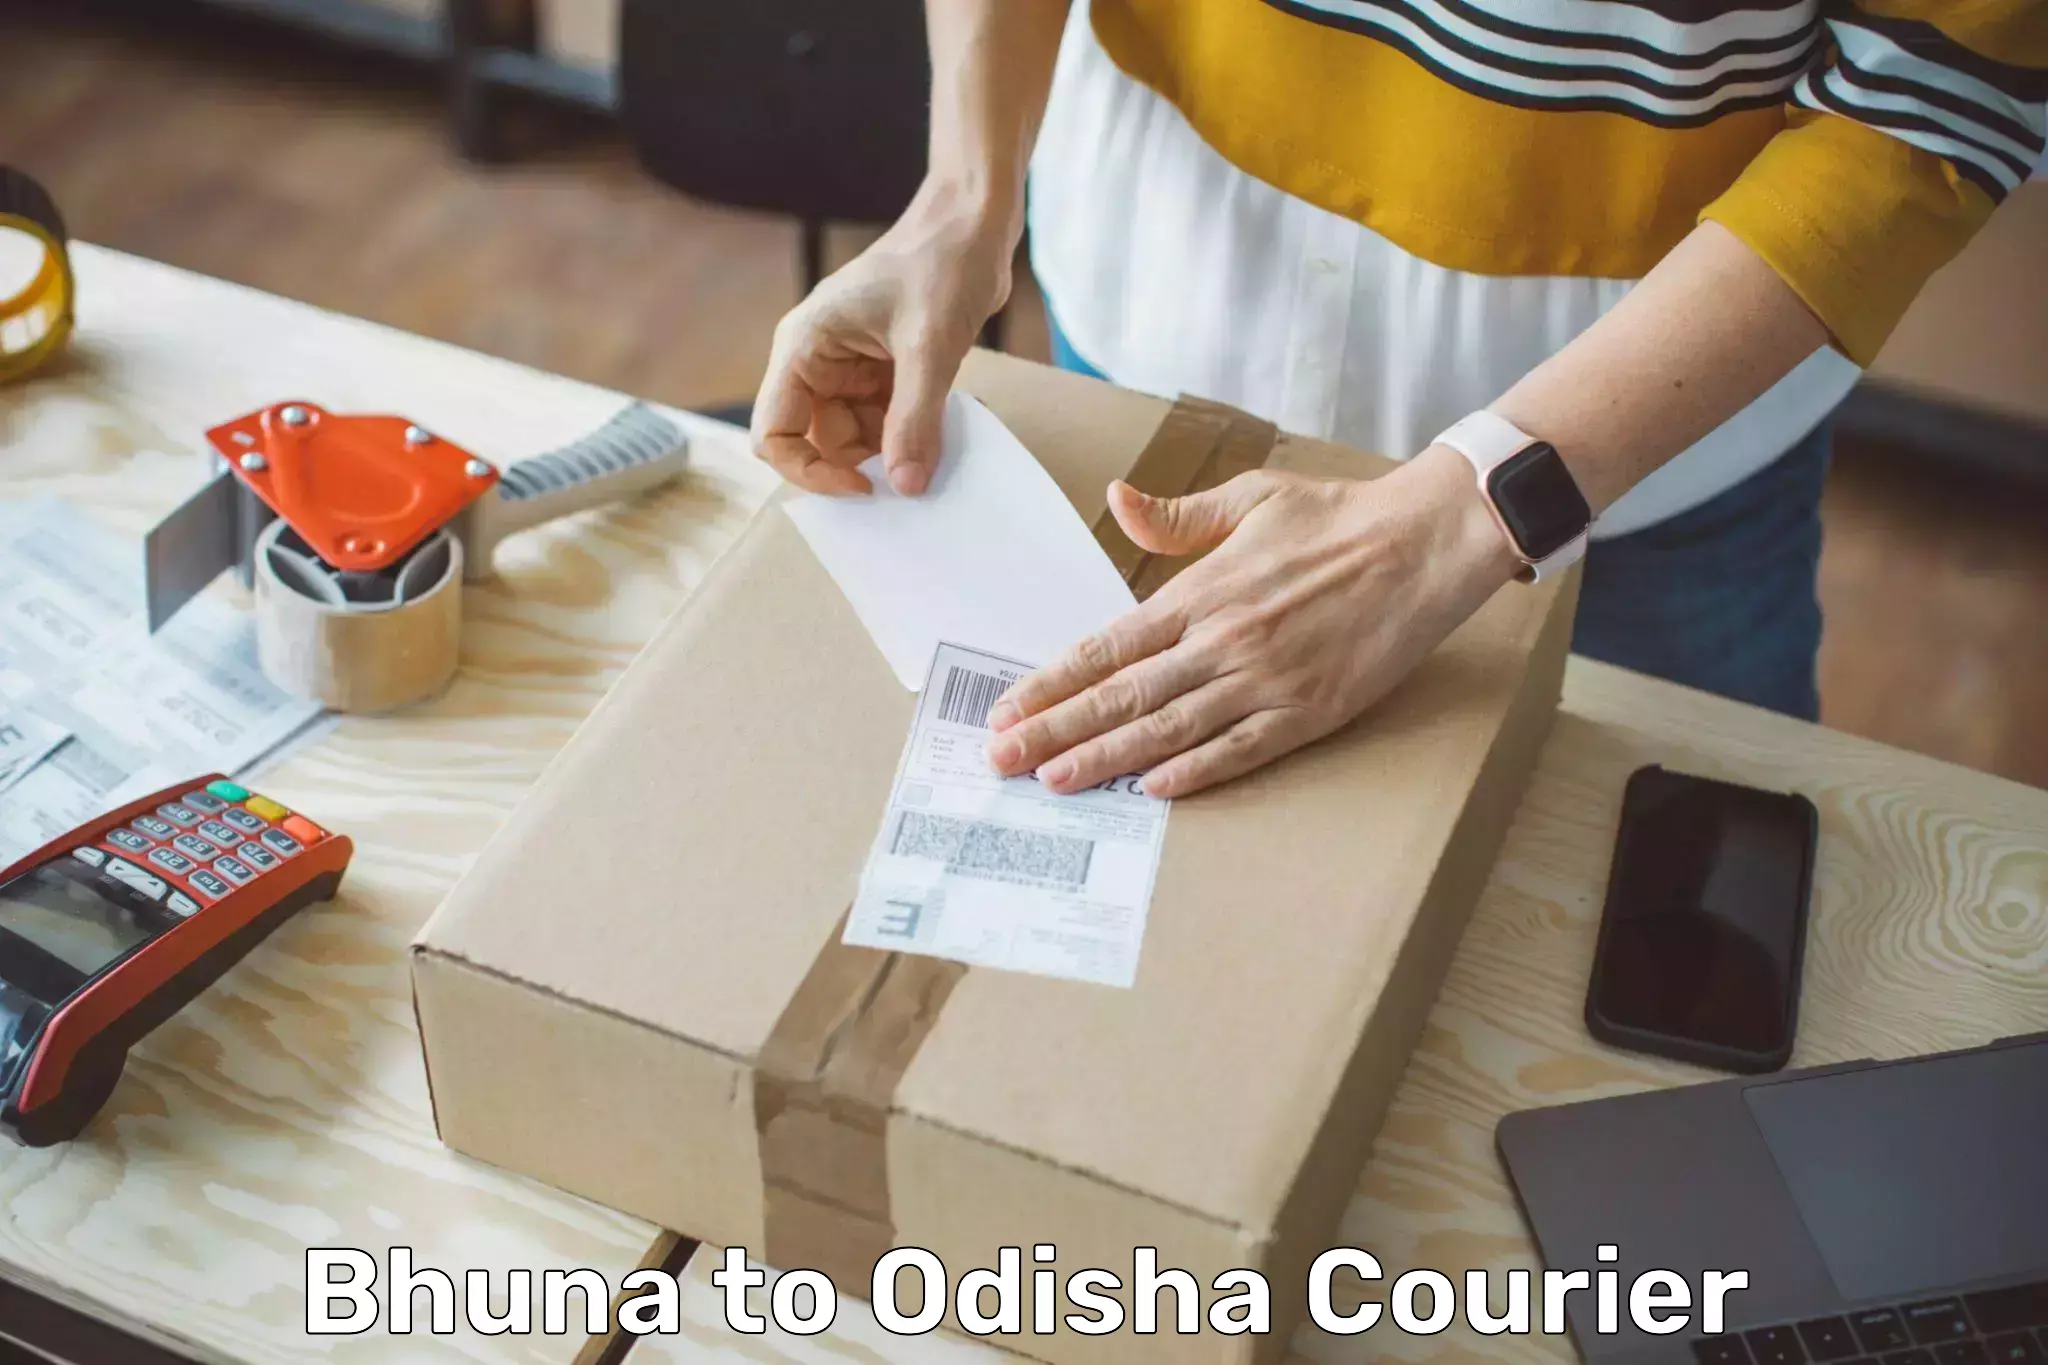 Bulk courier orders Bhuna to Sinapali